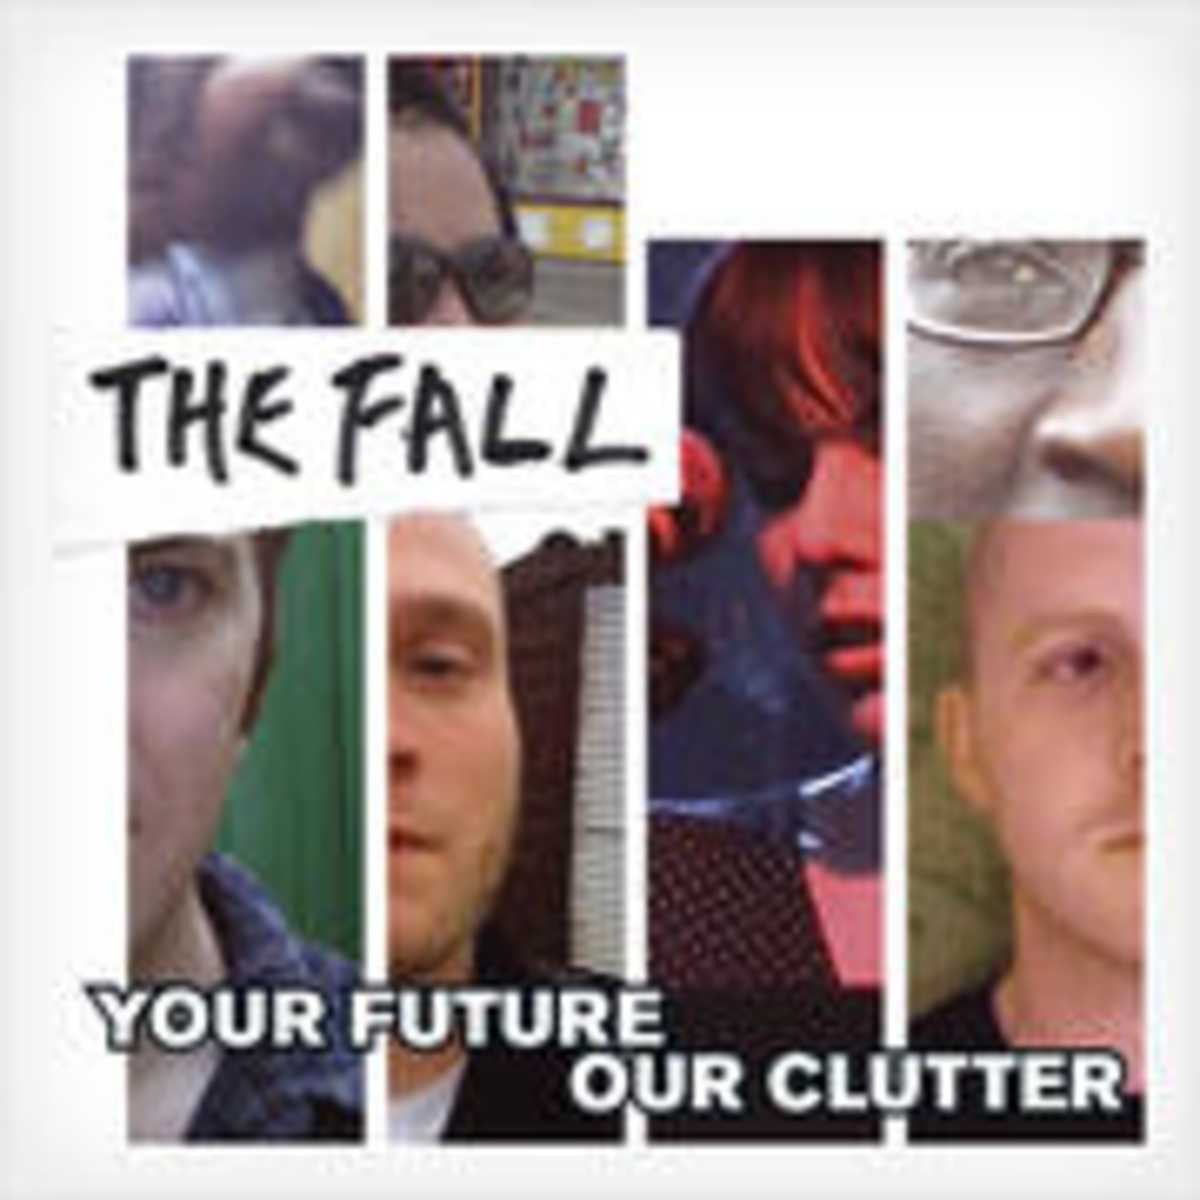 FALL-Your Future Our Clutter